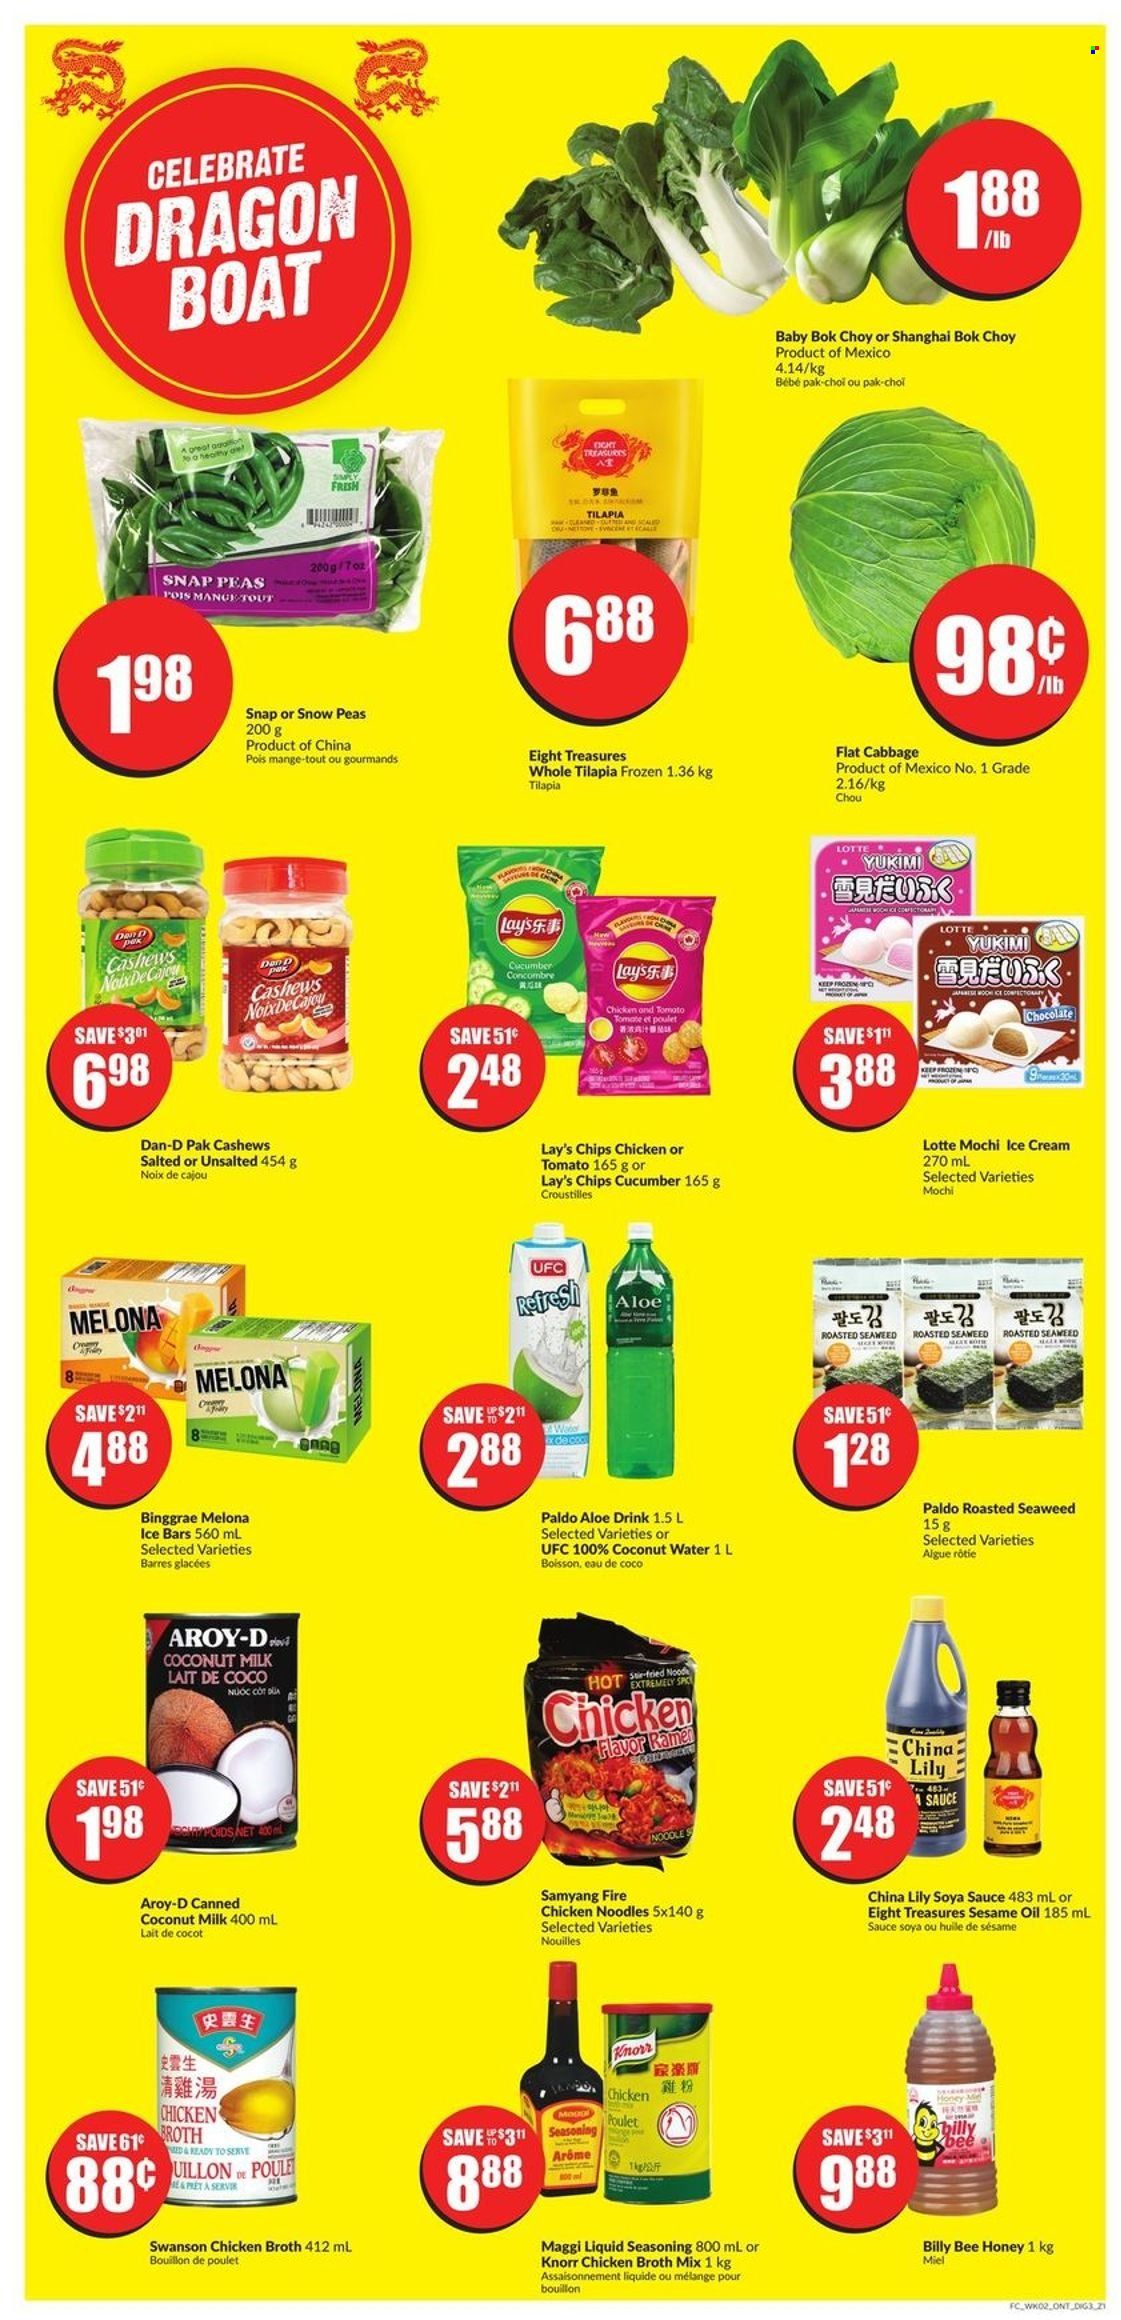 thumbnail - FreshCo. Flyer - May 12, 2022 - May 18, 2022 - Sales products - bok choy, cabbage, peas, tilapia, sauce, noodles, ice cream, snap peas, snow peas, Lay’s, bouillon, chicken broth, seaweed, Maggi, broth, coconut milk, Dan-D Pak, spice, soy sauce, sesame oil, oil, honey, cashews, coconut water, Knorr, flat cabbage. Page 7.